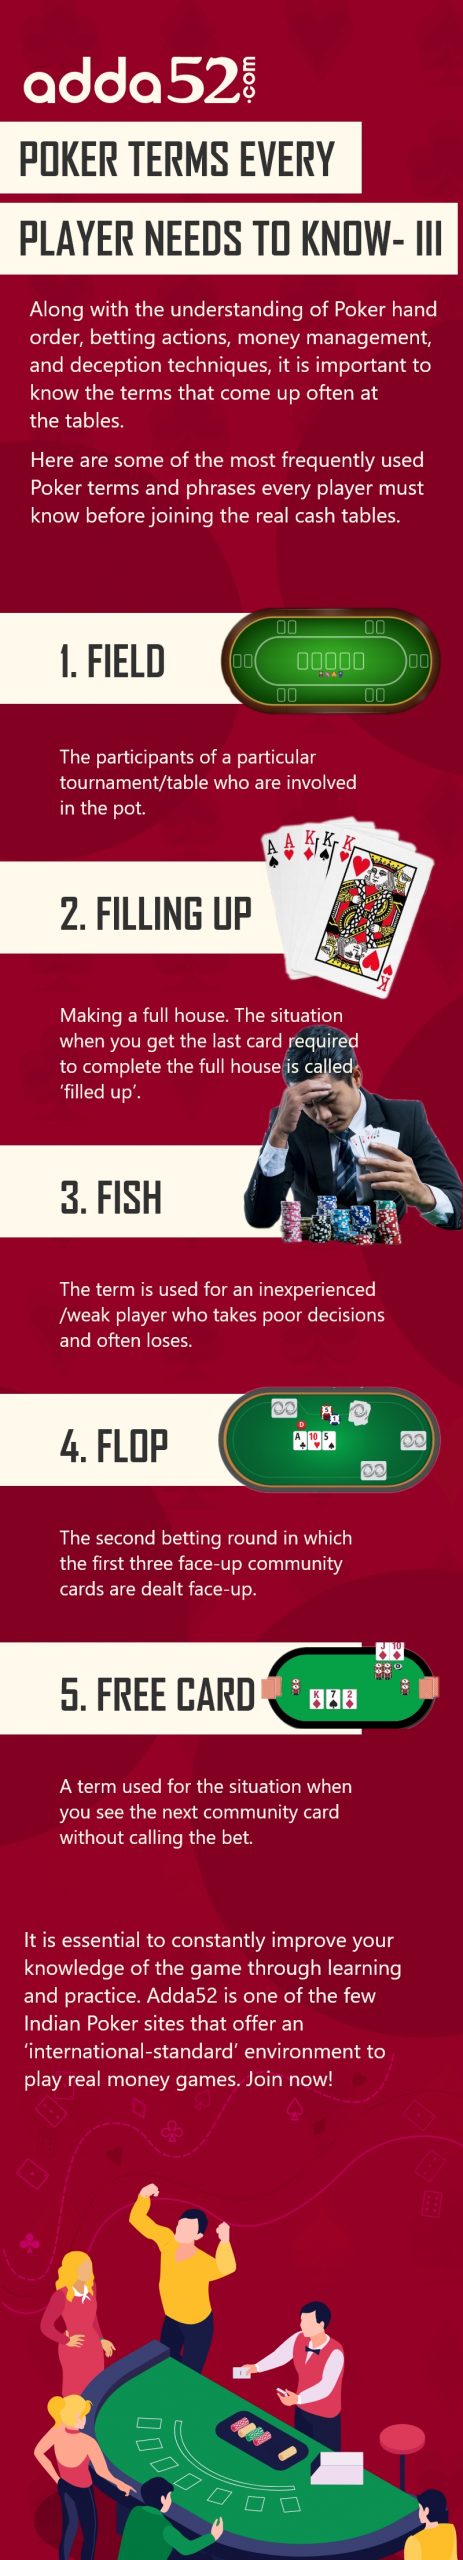 Poker terms Every Player Needs to Know- III